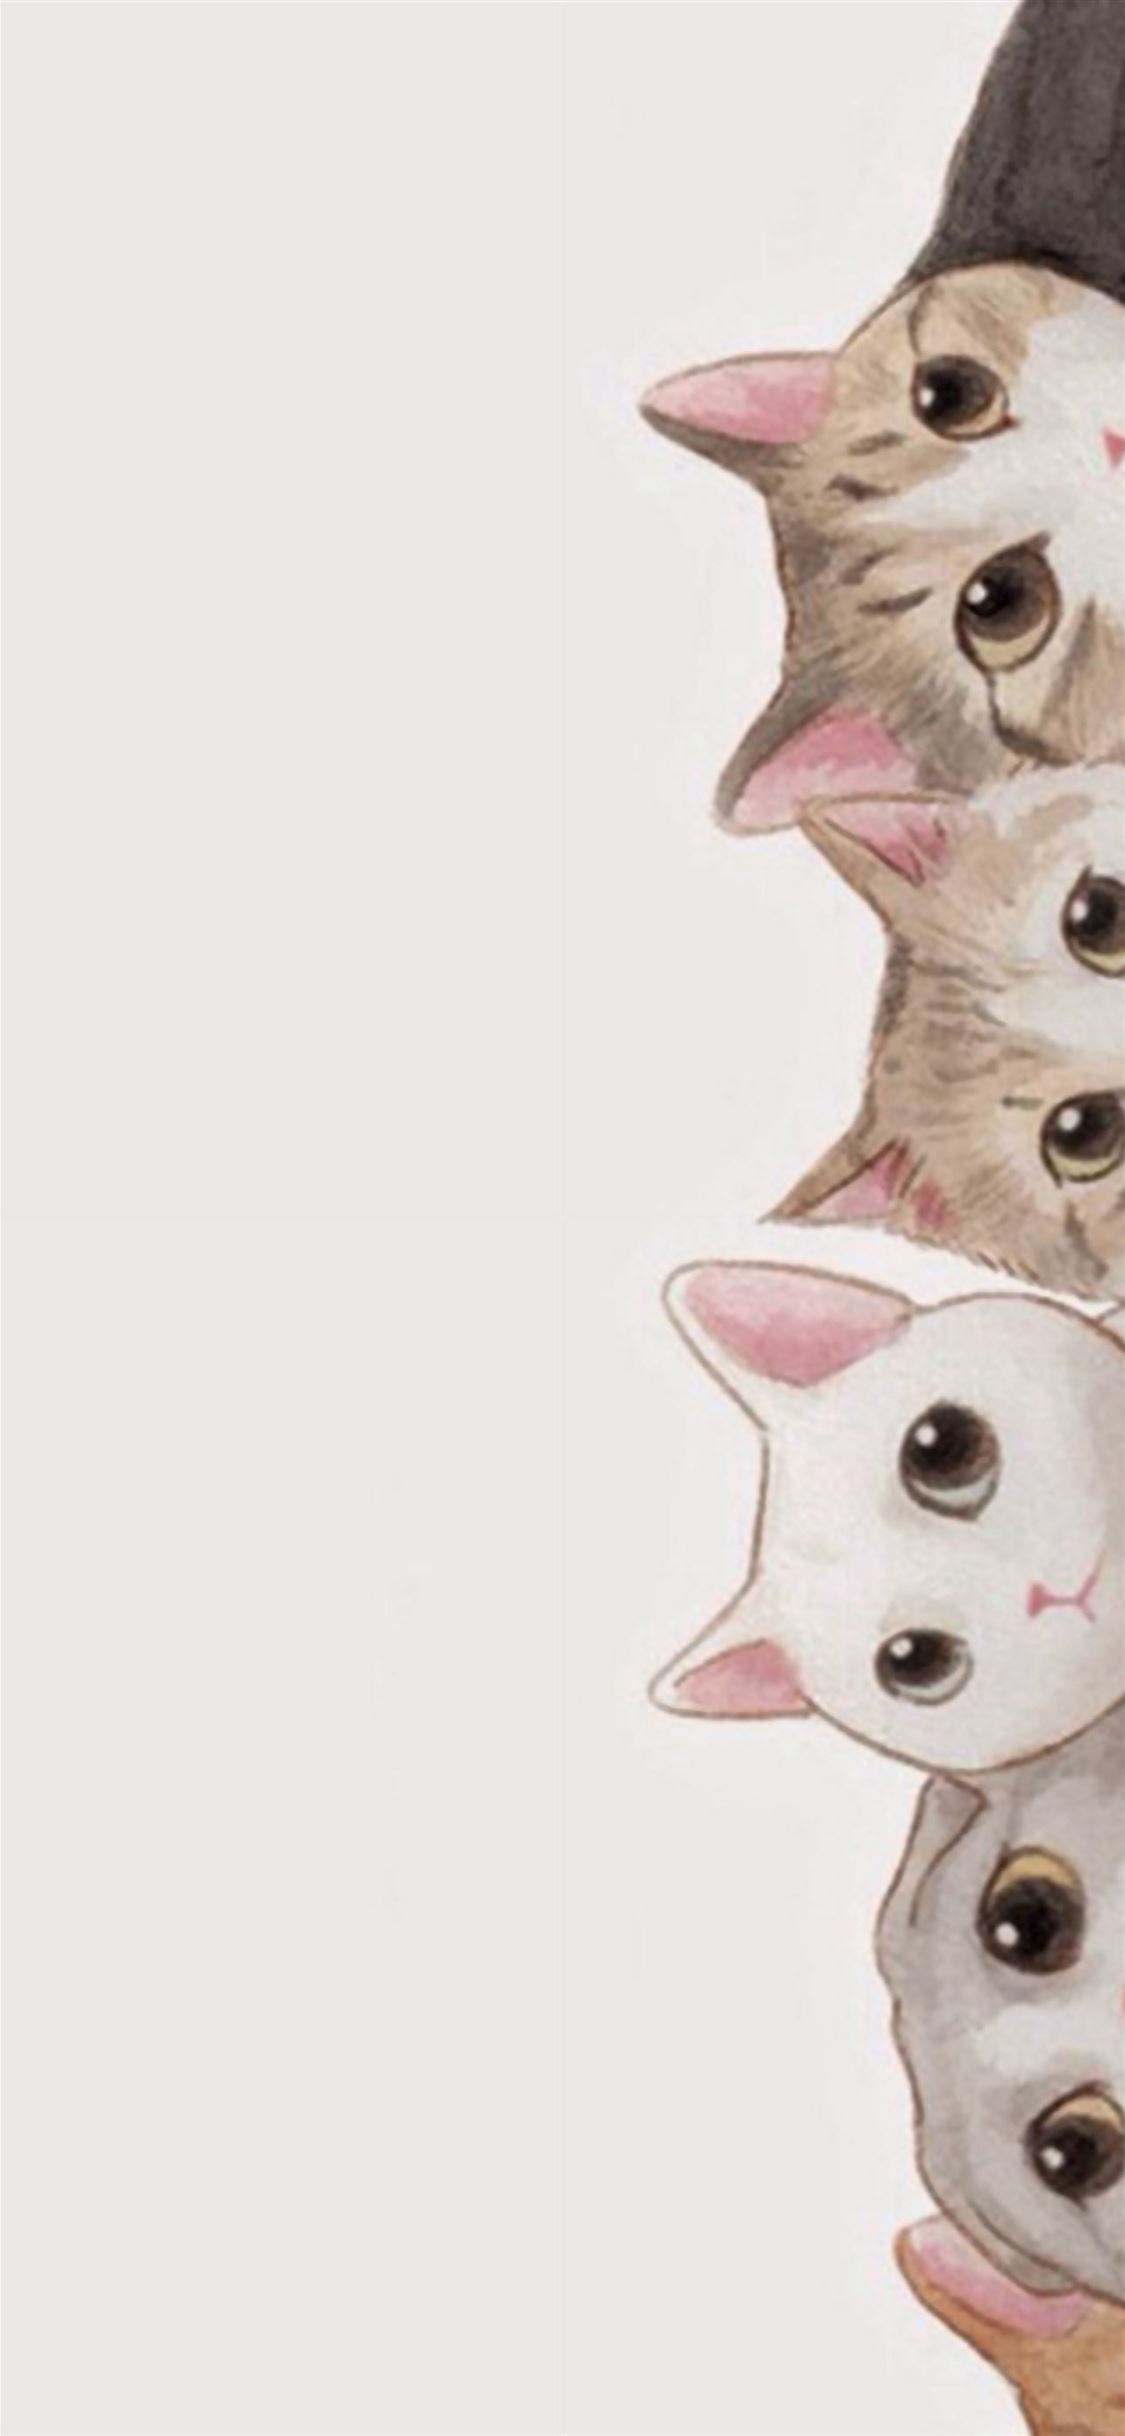 Cute Cats Vertical Aligned Illustration iPhone wallpaper 